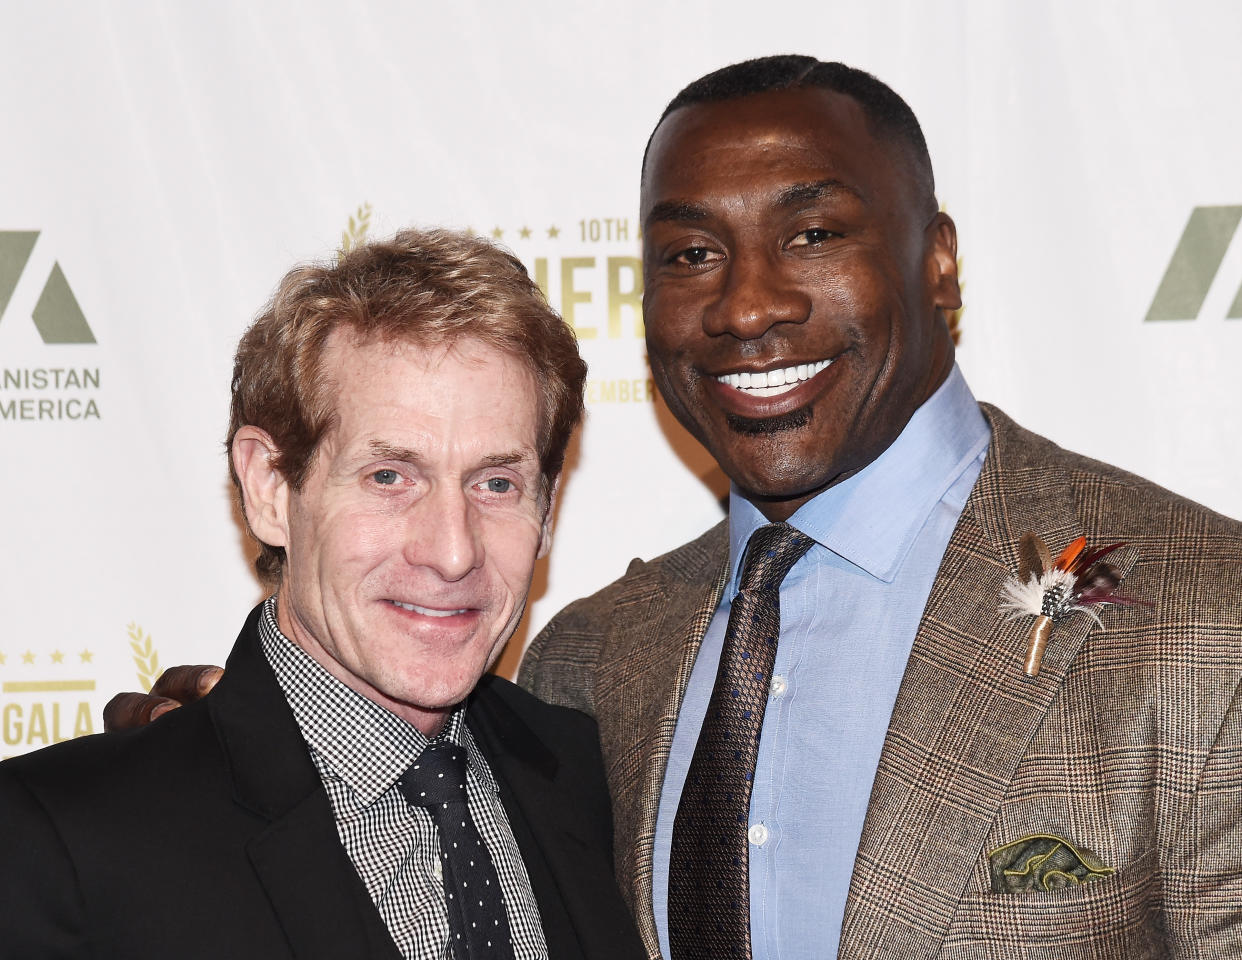 Shannon Sharpe thanked Skip Bayless for their time together on 